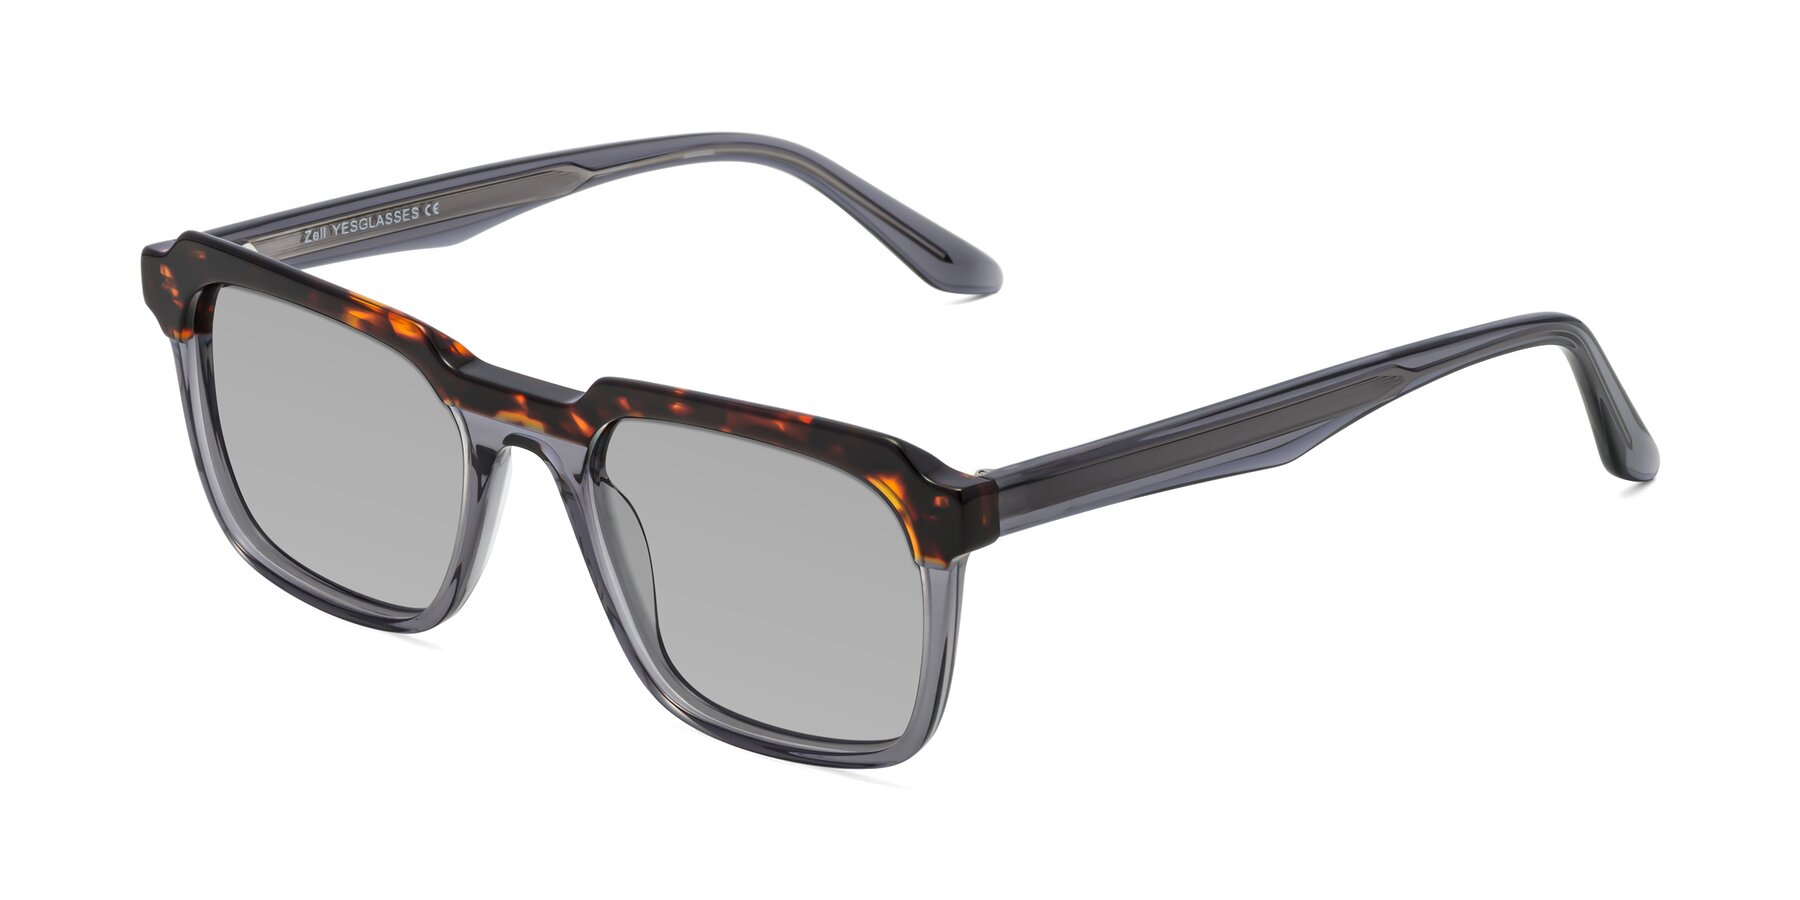 Angle of Zell in Tortoise/Gray with Light Gray Tinted Lenses